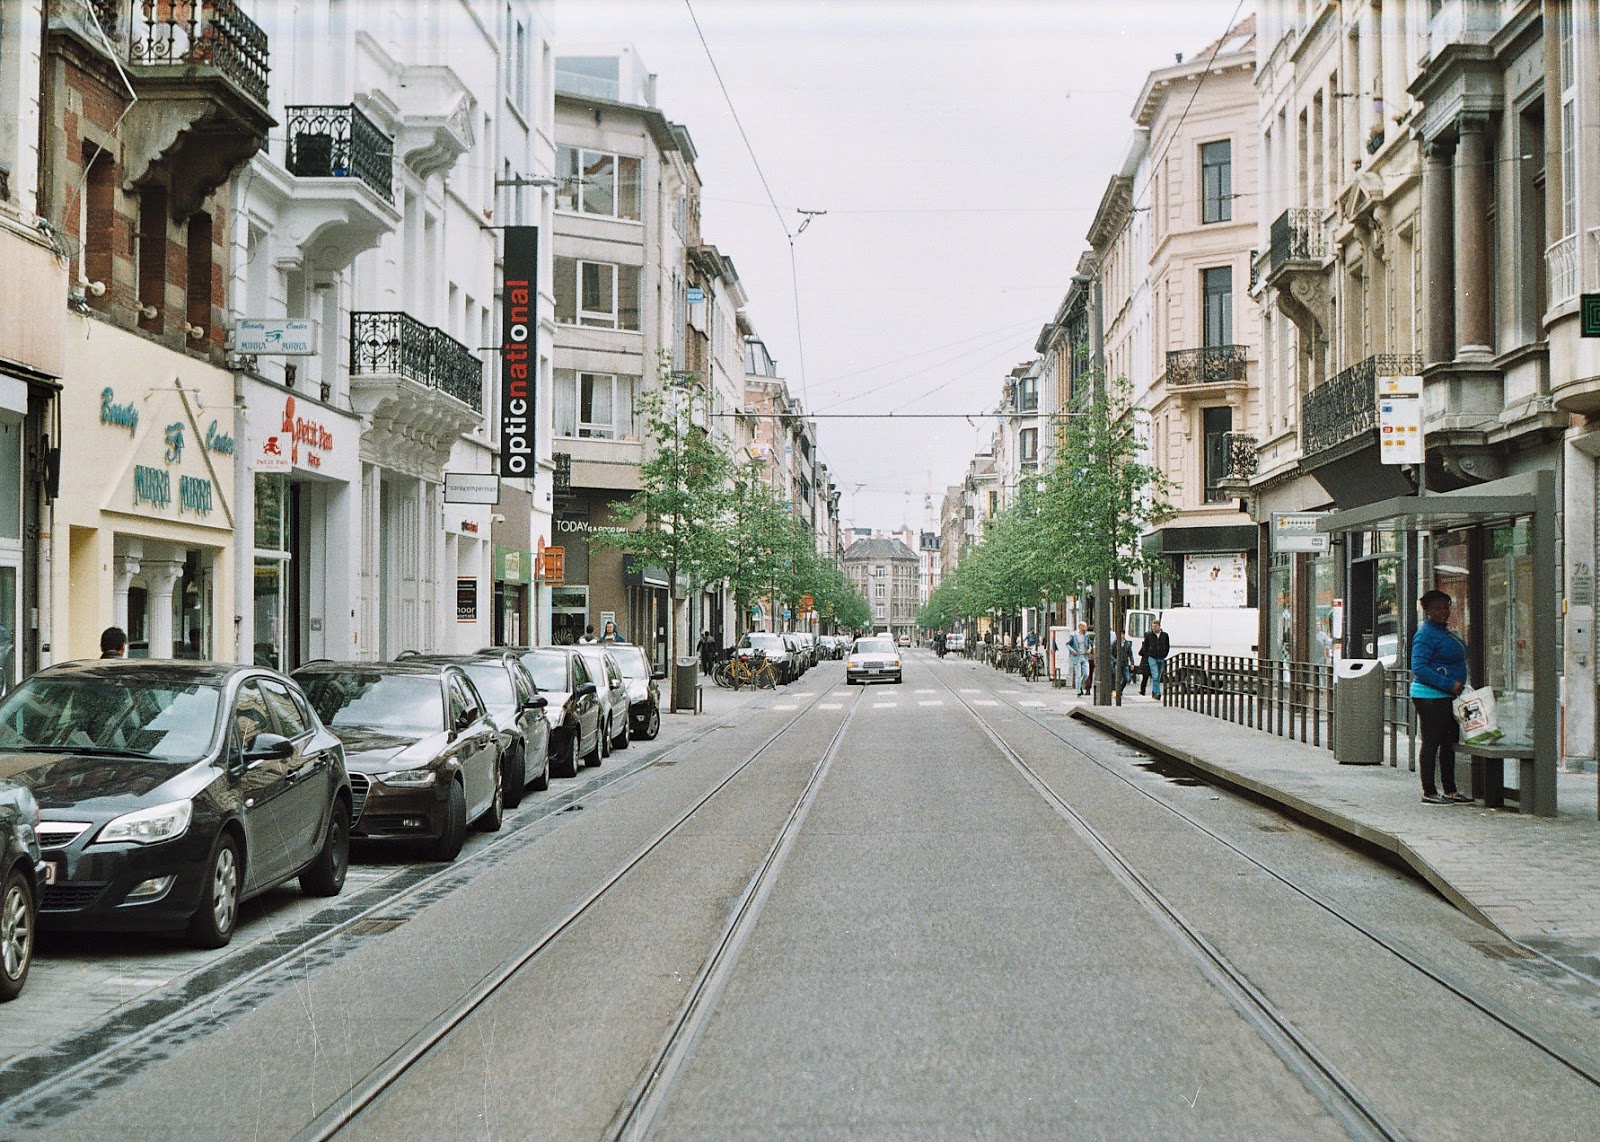 Antwerp Film Travel Guide - What To See? | oandrajos.blogspot.co.uk